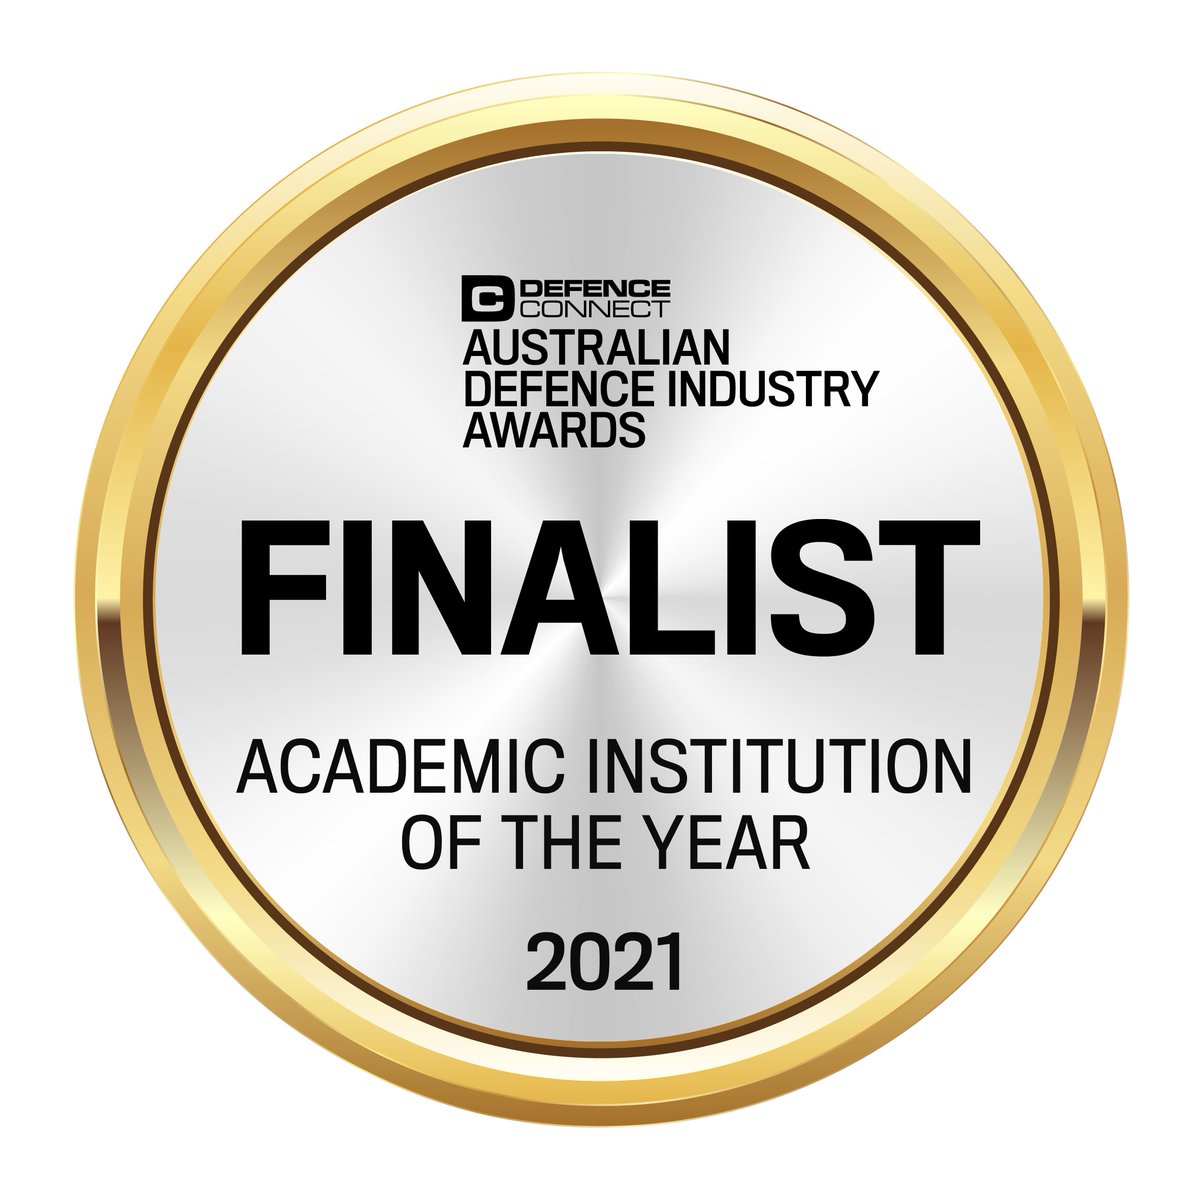 Great to see @UniversitySA shortlisted as Academic Institution of the Year in the #australiandefenceindustryawards @DefenceConnect. The awards recognise excellence from defence professionals, organisations and businesses across the country, with winners to be announced on Dec 7.